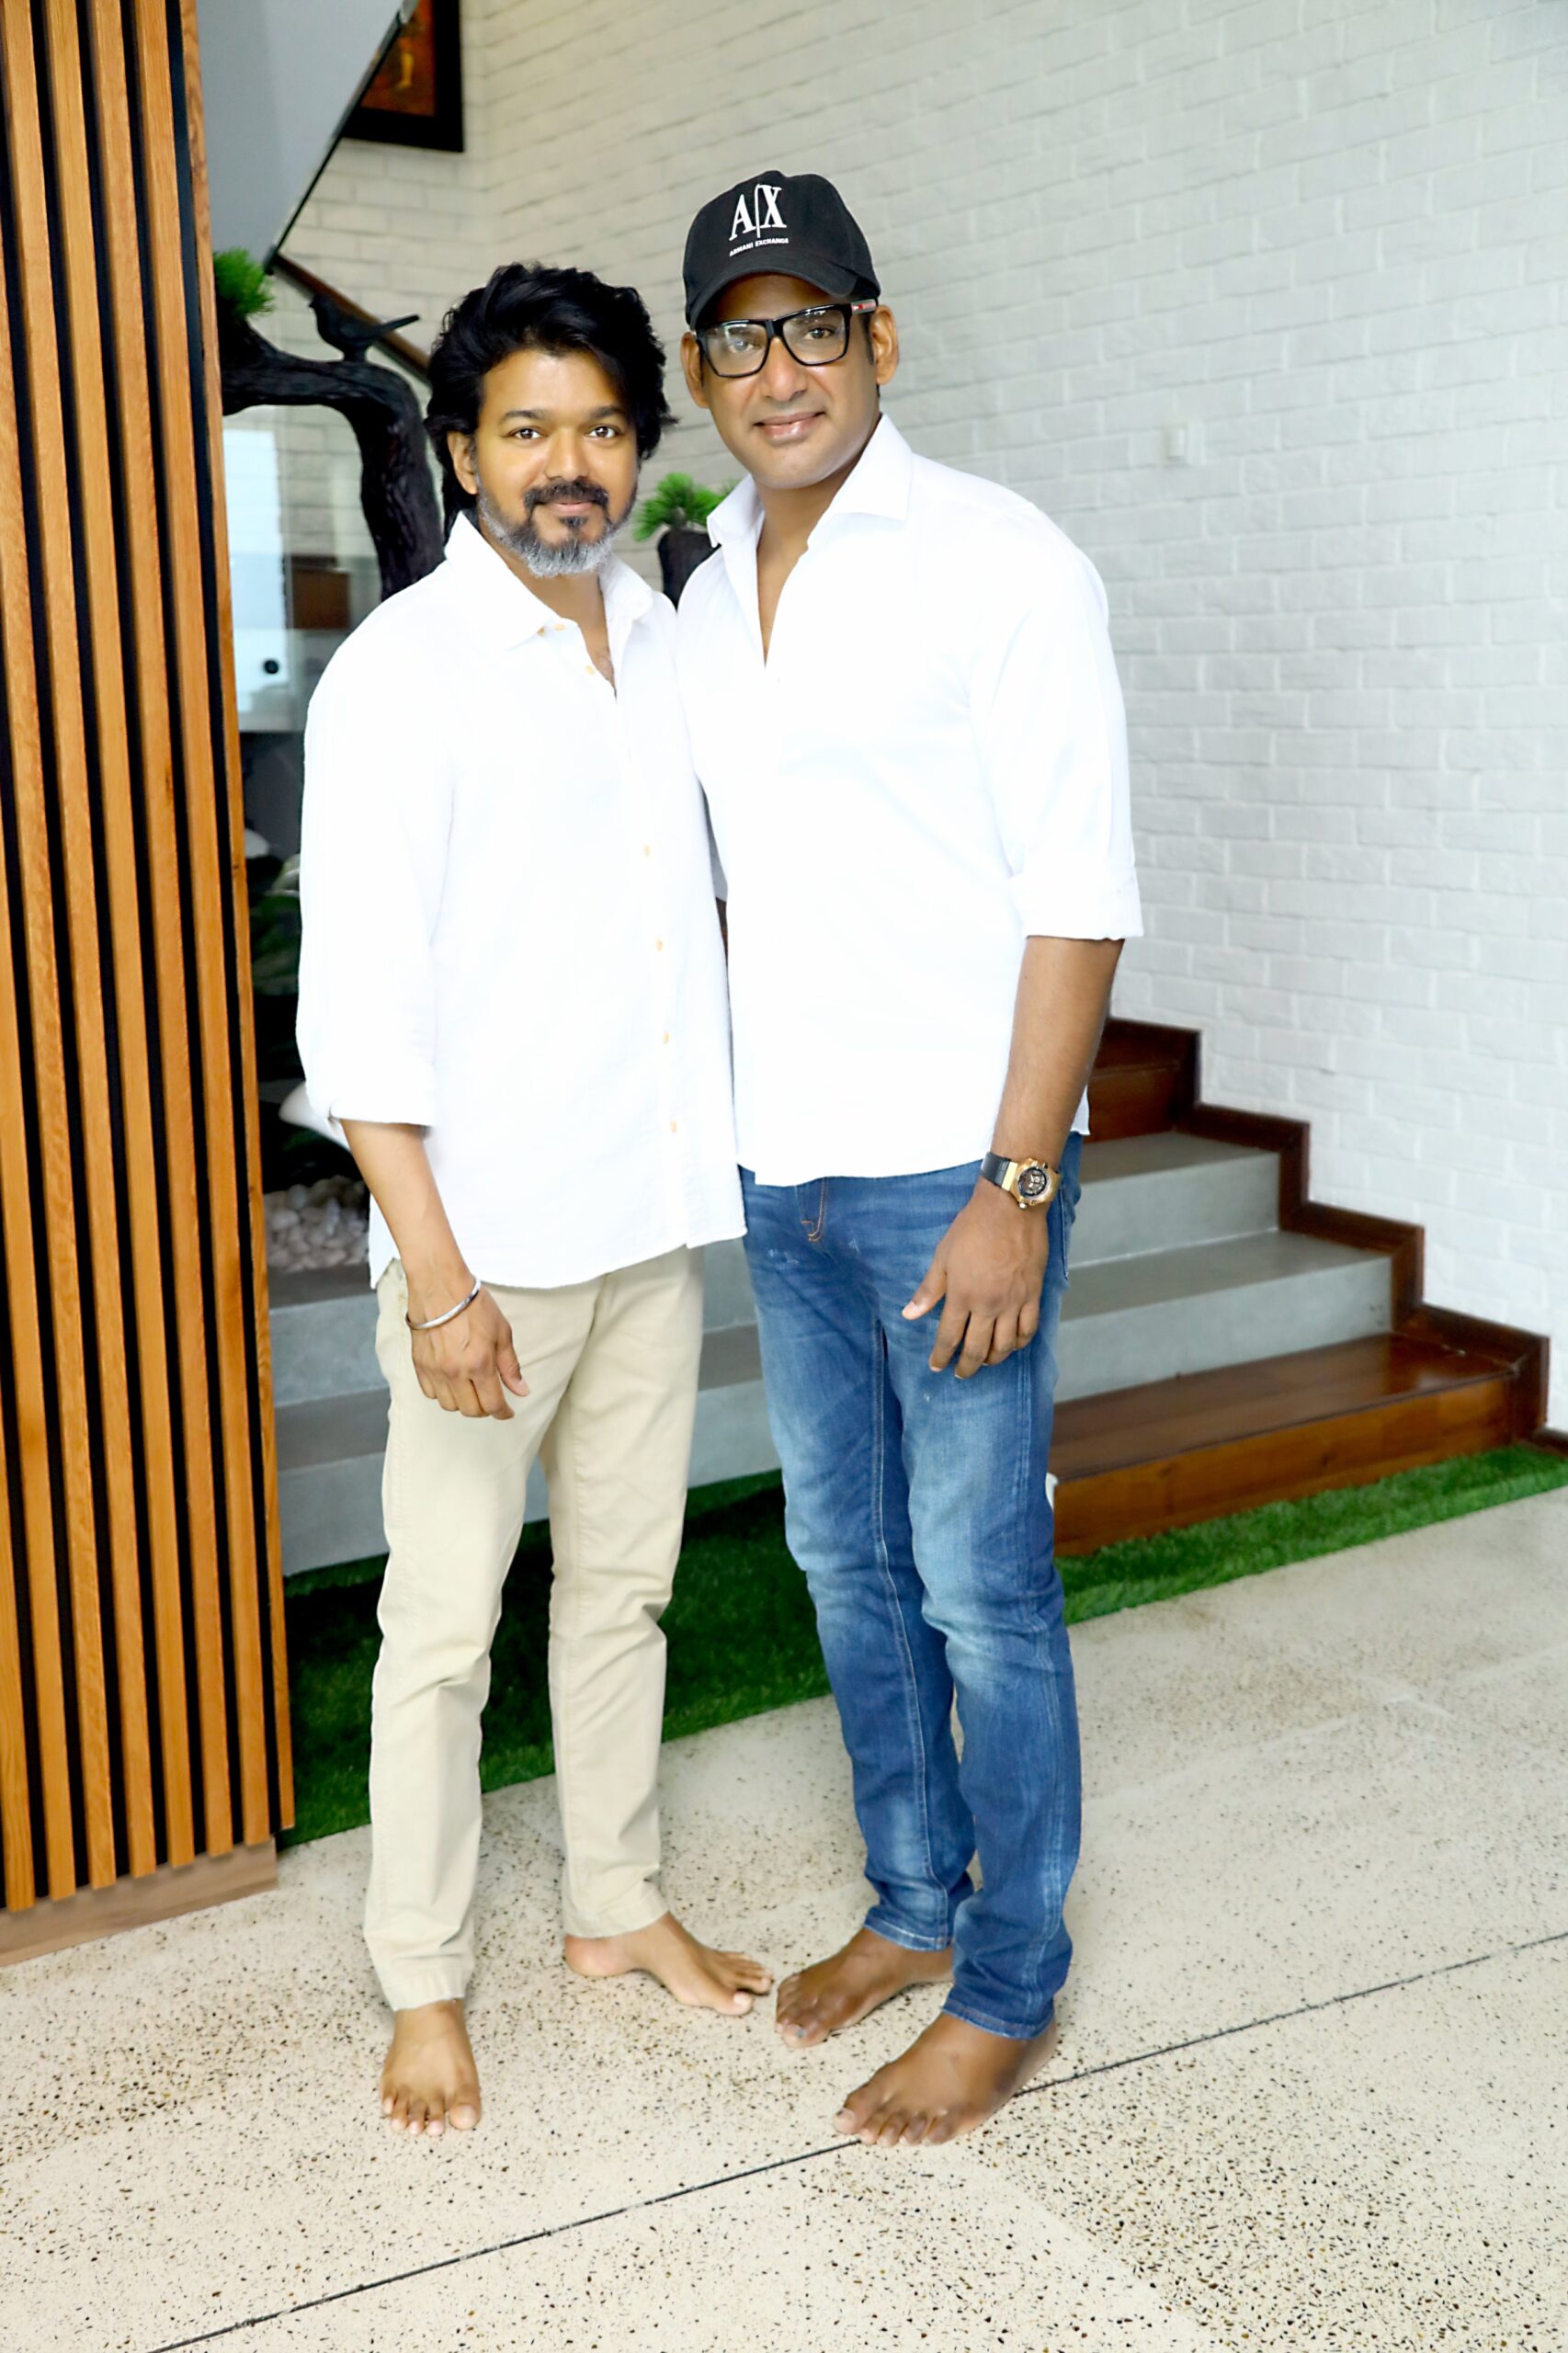 Puratchi Thalapathy meets Thalapathy!